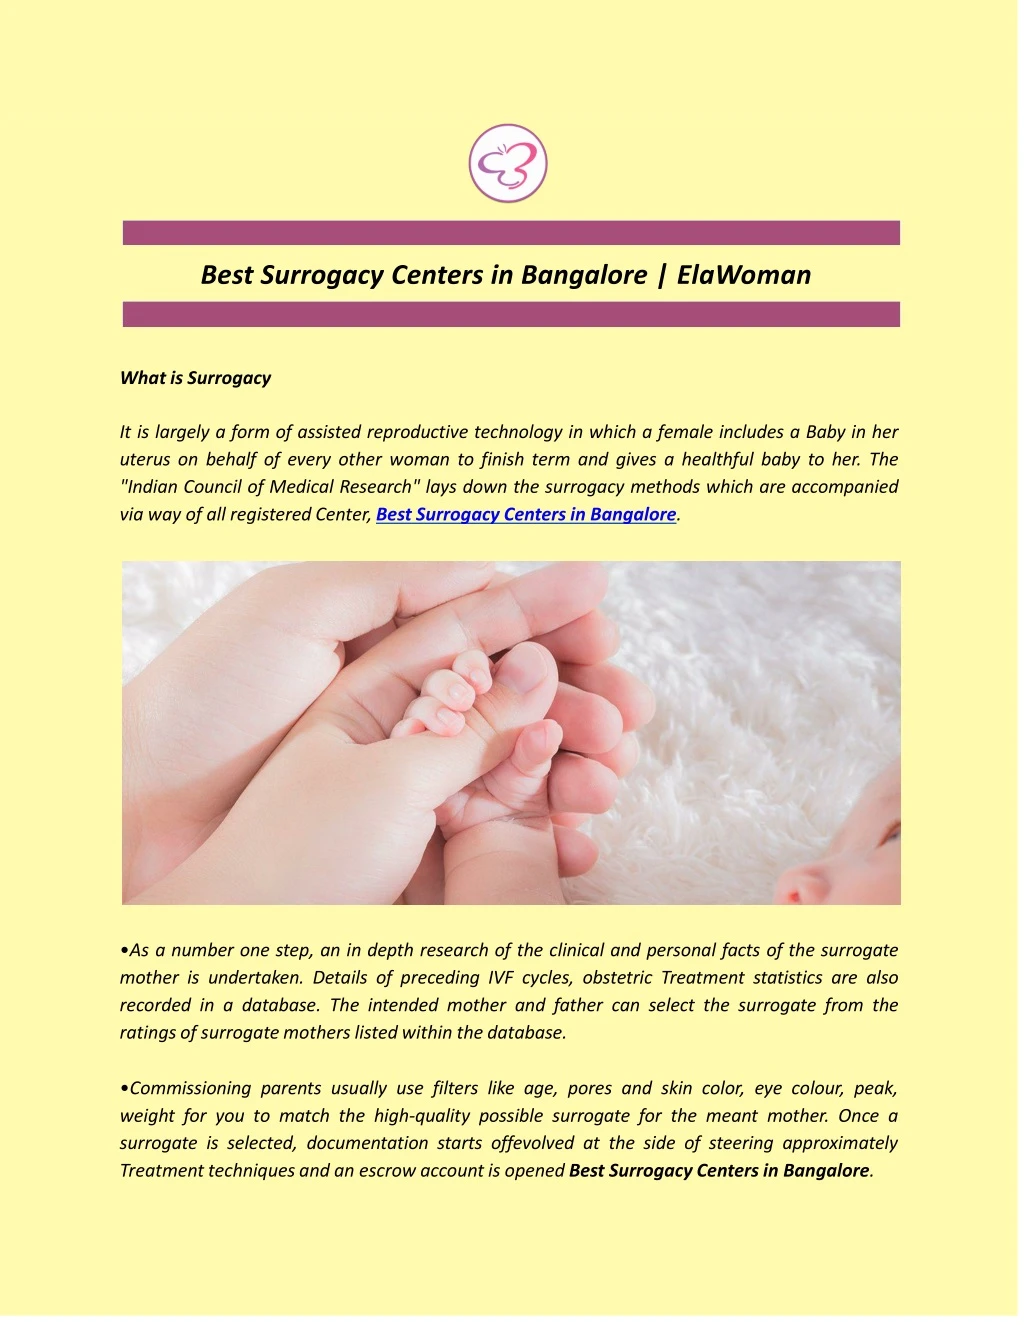 best surrogacy centers in bangalore elawoman